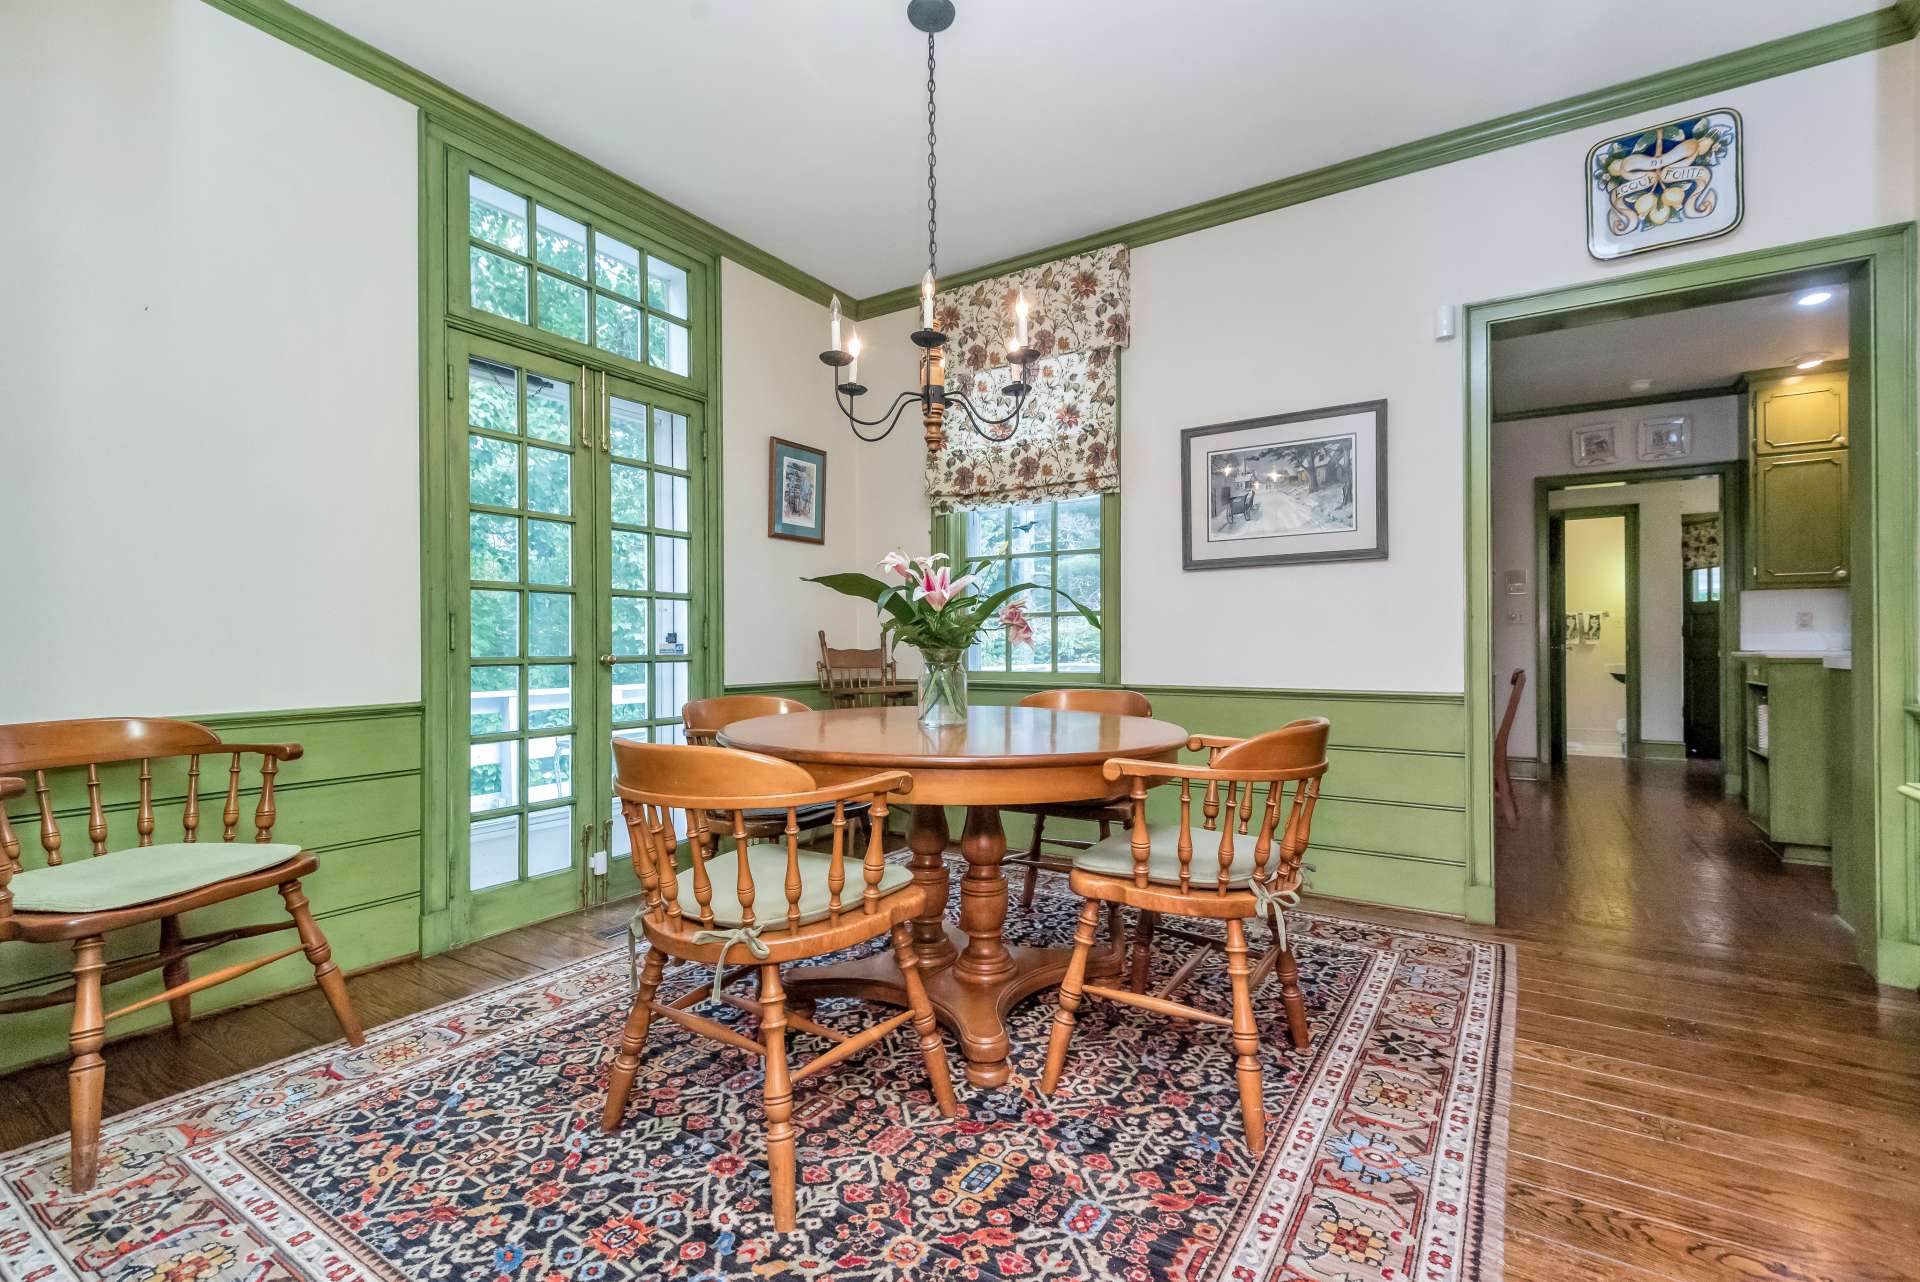 You will delight in the cozy breakfast room with double doors leading to the open deck. On the wall on the left, you will find hand-crafted built-in cabinets for added storage.